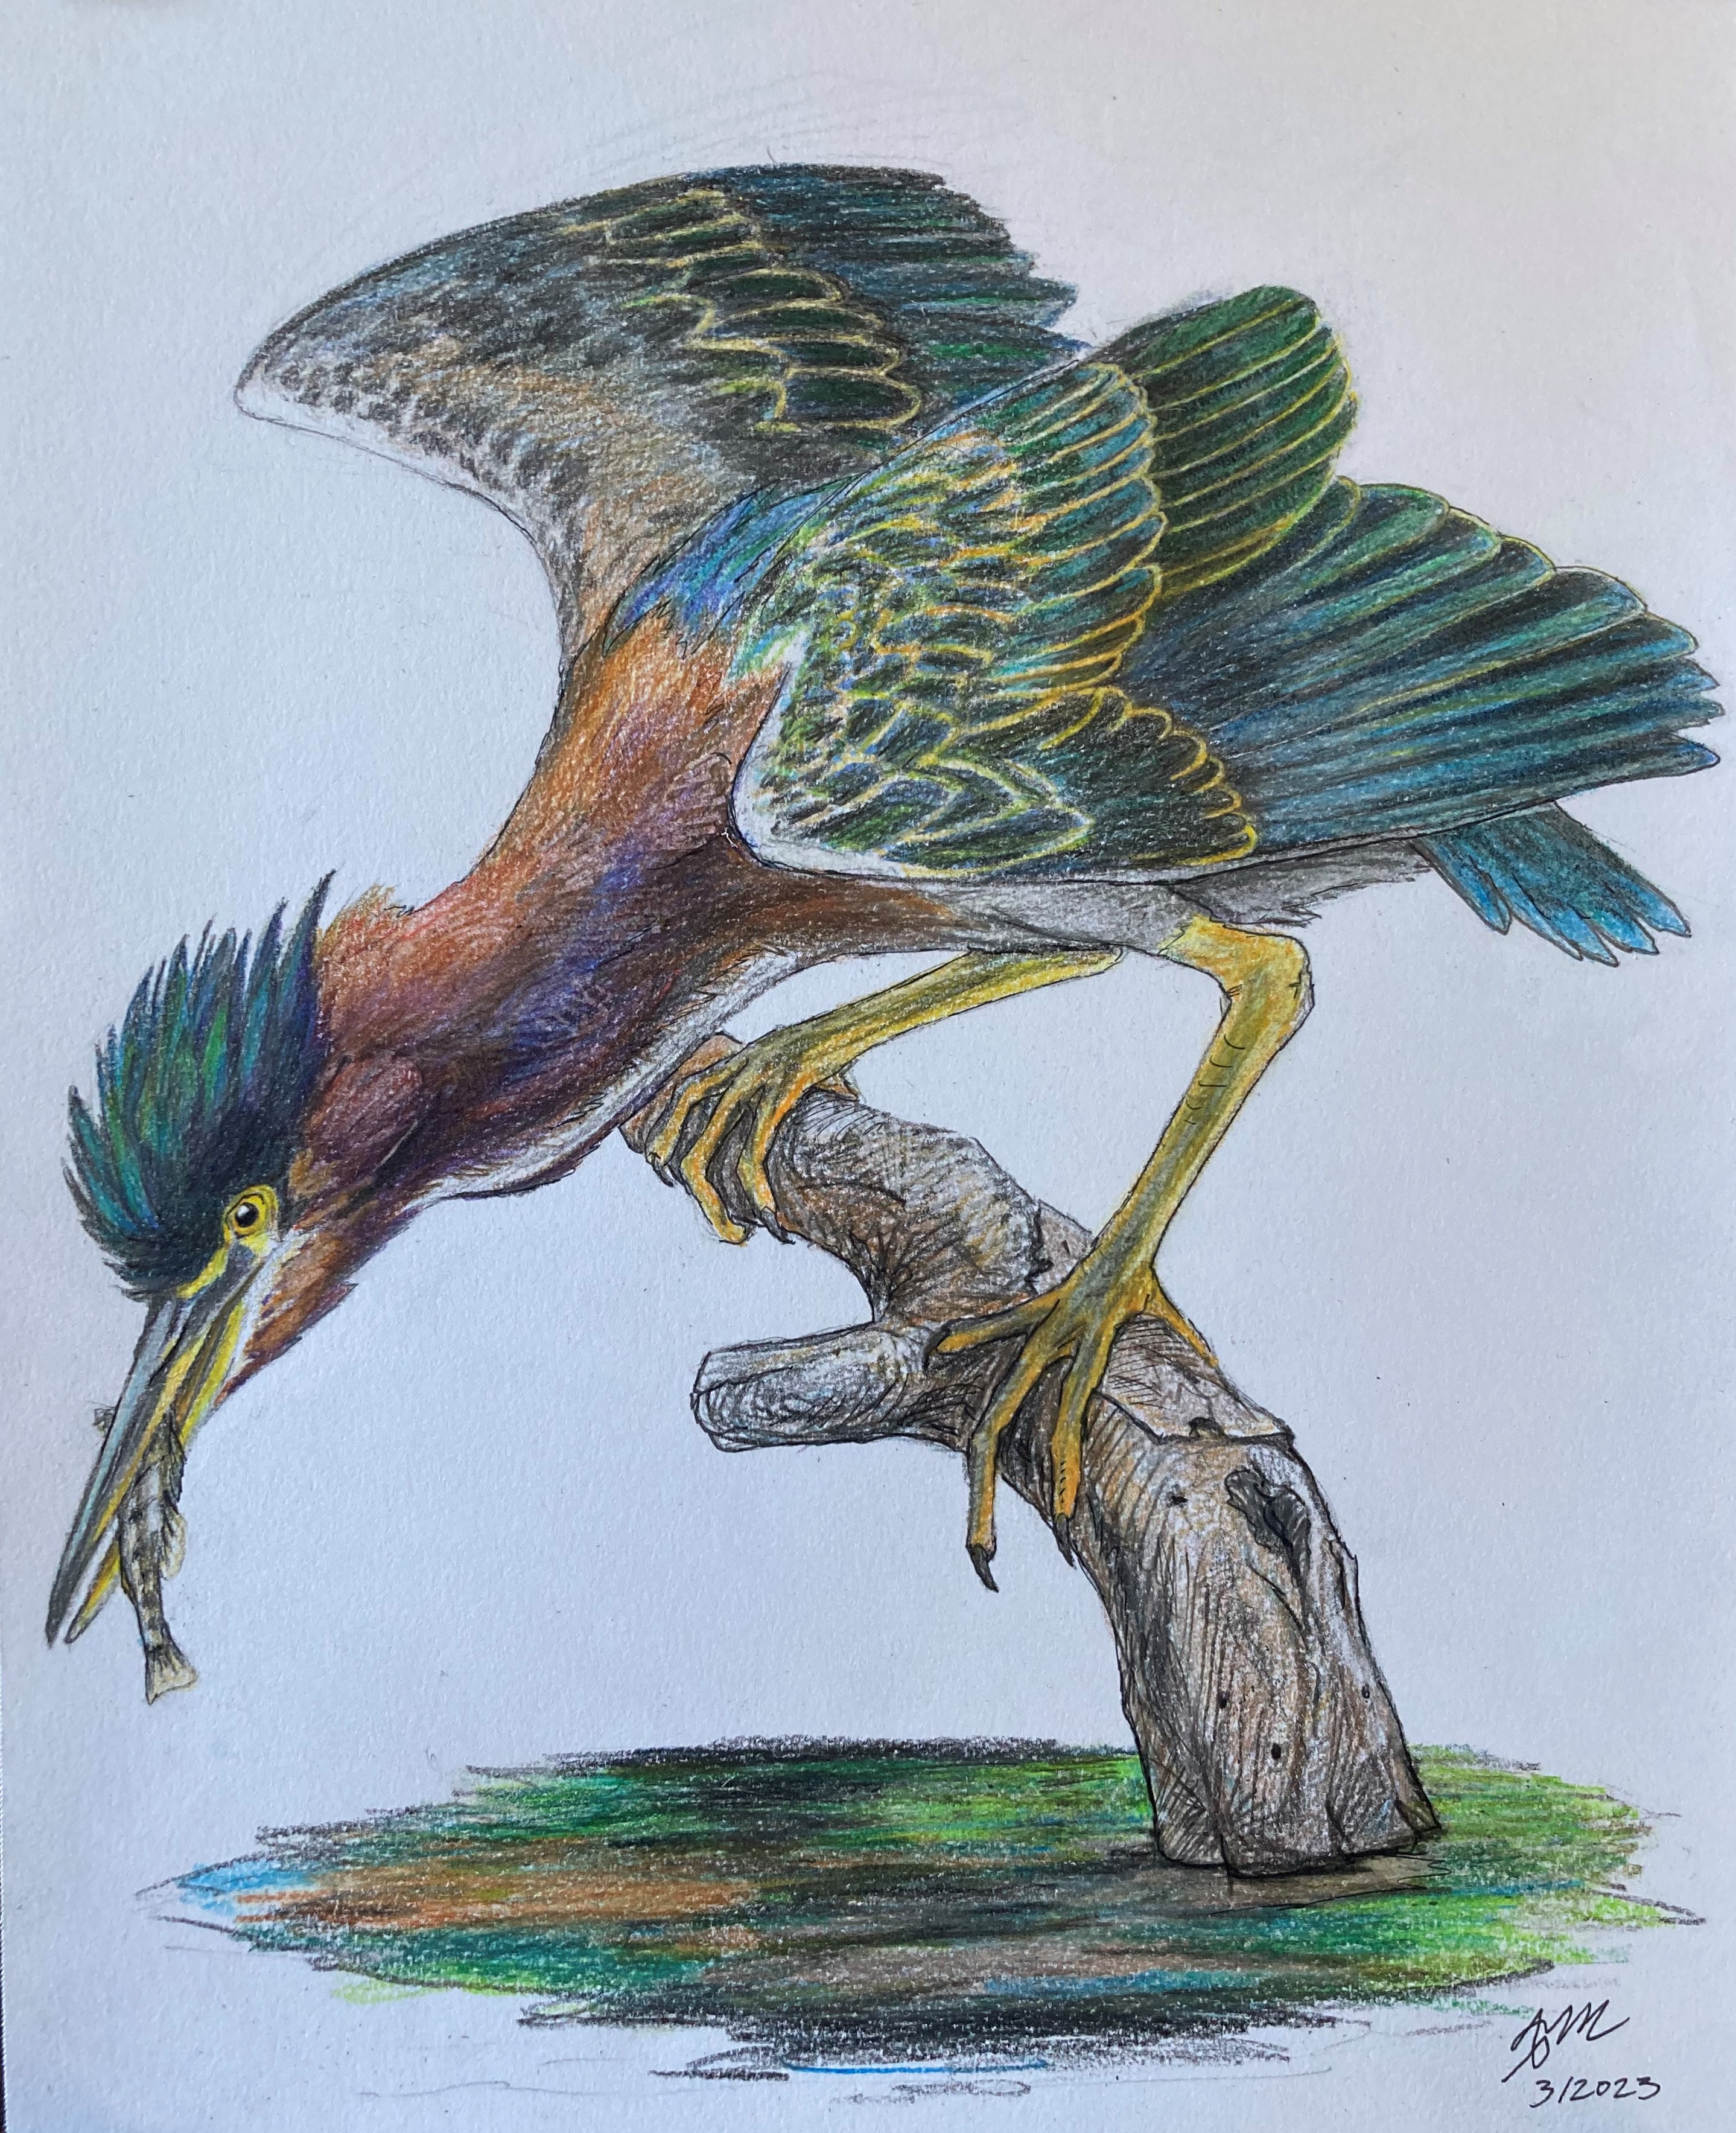 A drawing of a Green Heron perched on a log sticking out above the water. It is leaning forward, holding its fresh catch of a small fish in its beak.